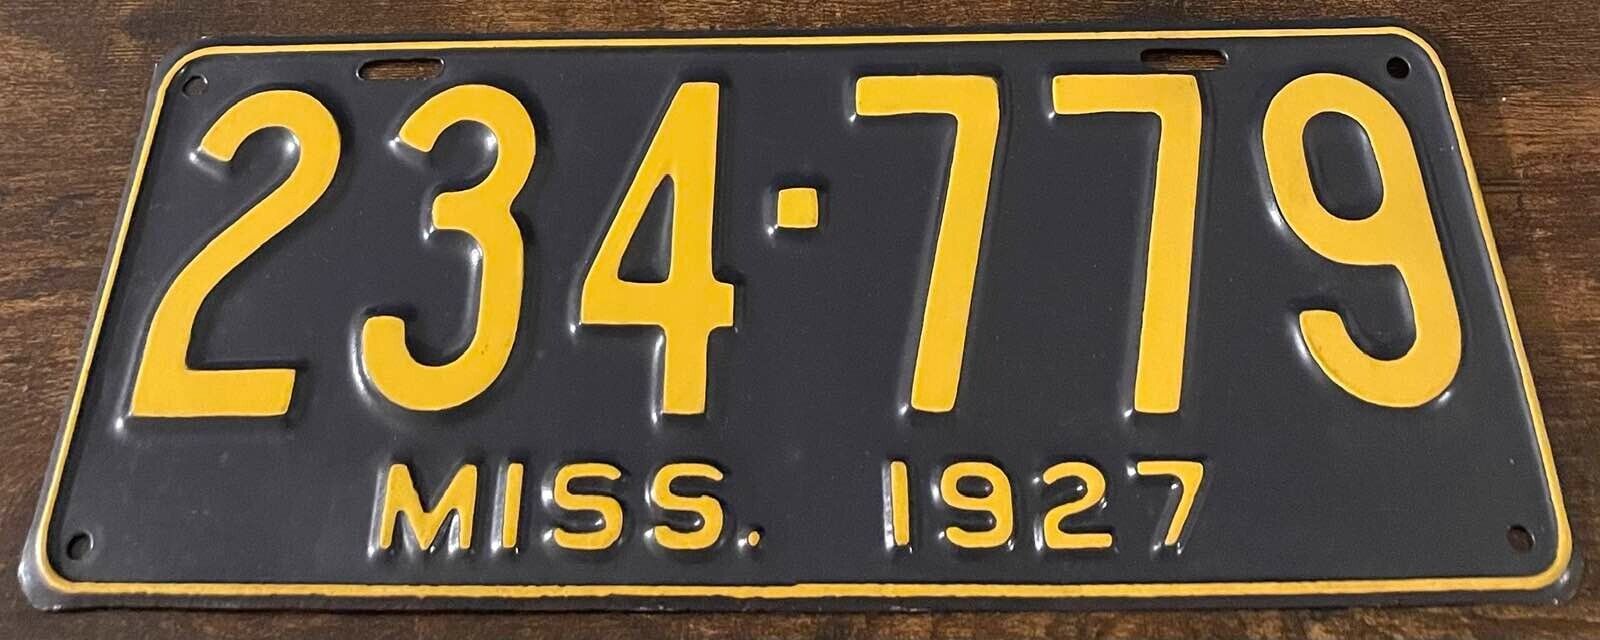 1927 Mississippi Vintage License Plate 234-779 Repaint Professionally Restored